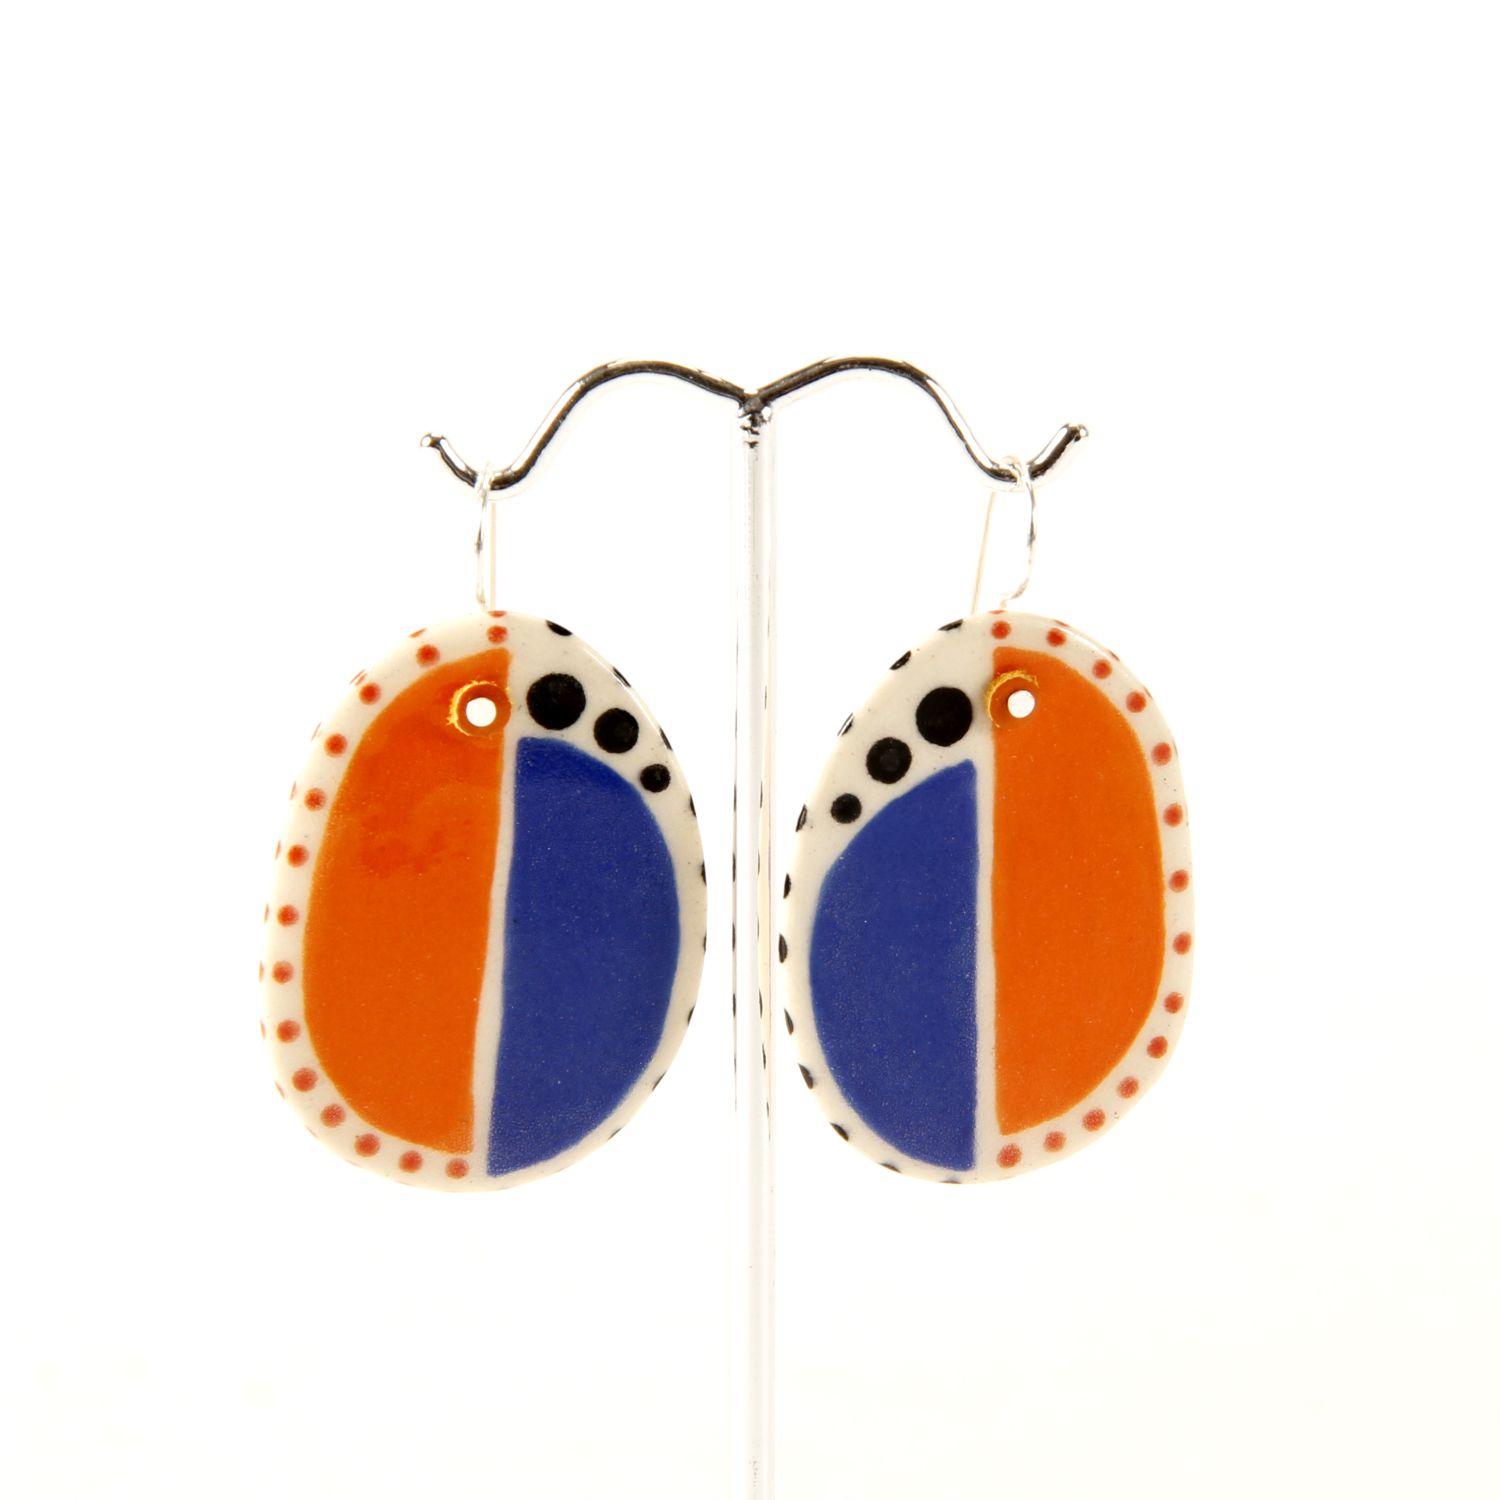 Here and Here: Half Blue and Half Orange Ceramic Disc Earrings Product Image 1 of 4